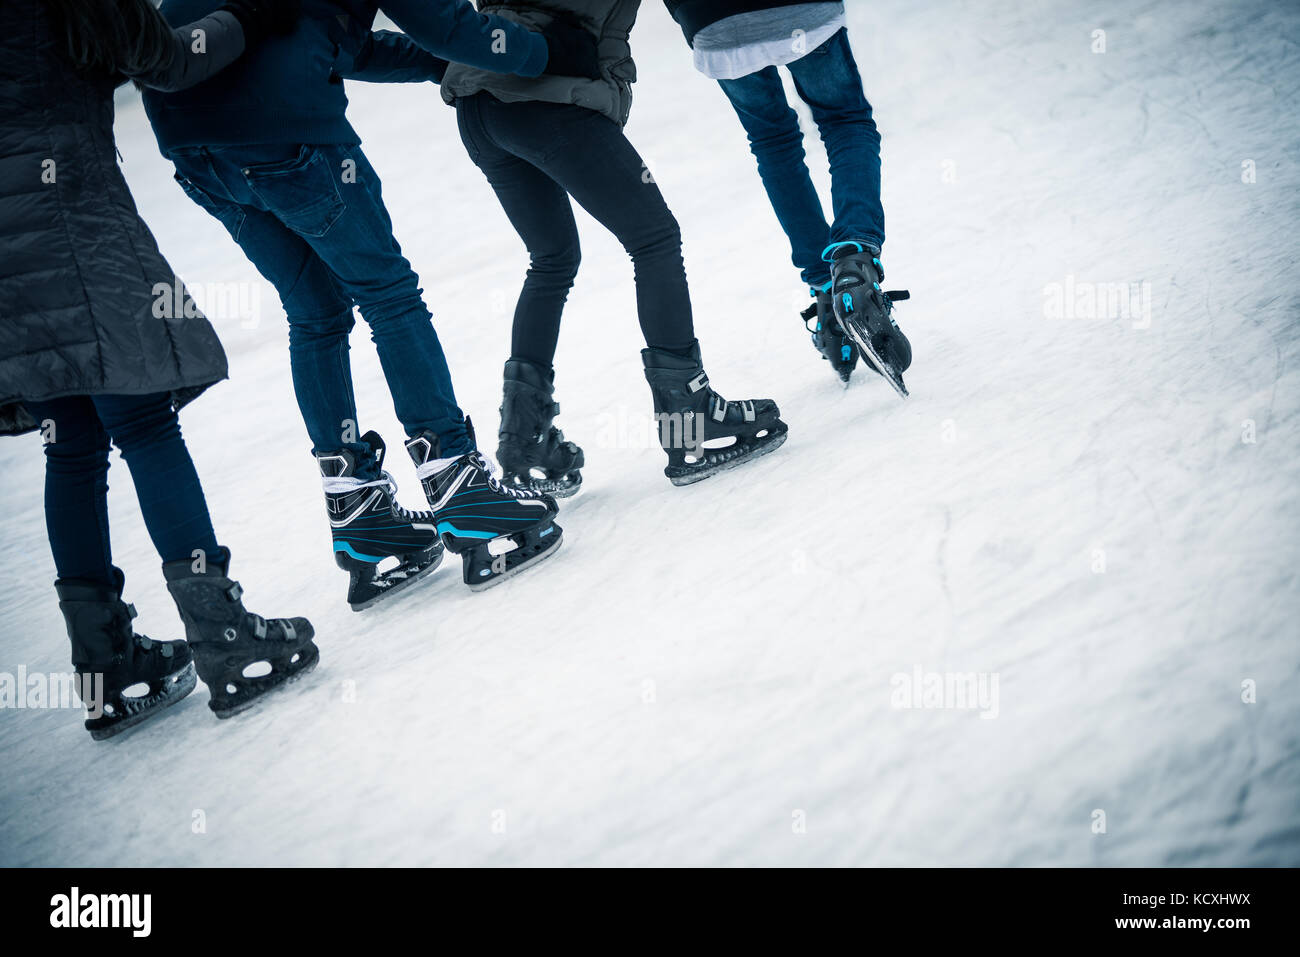 Four young people skating on ice Stock Photo